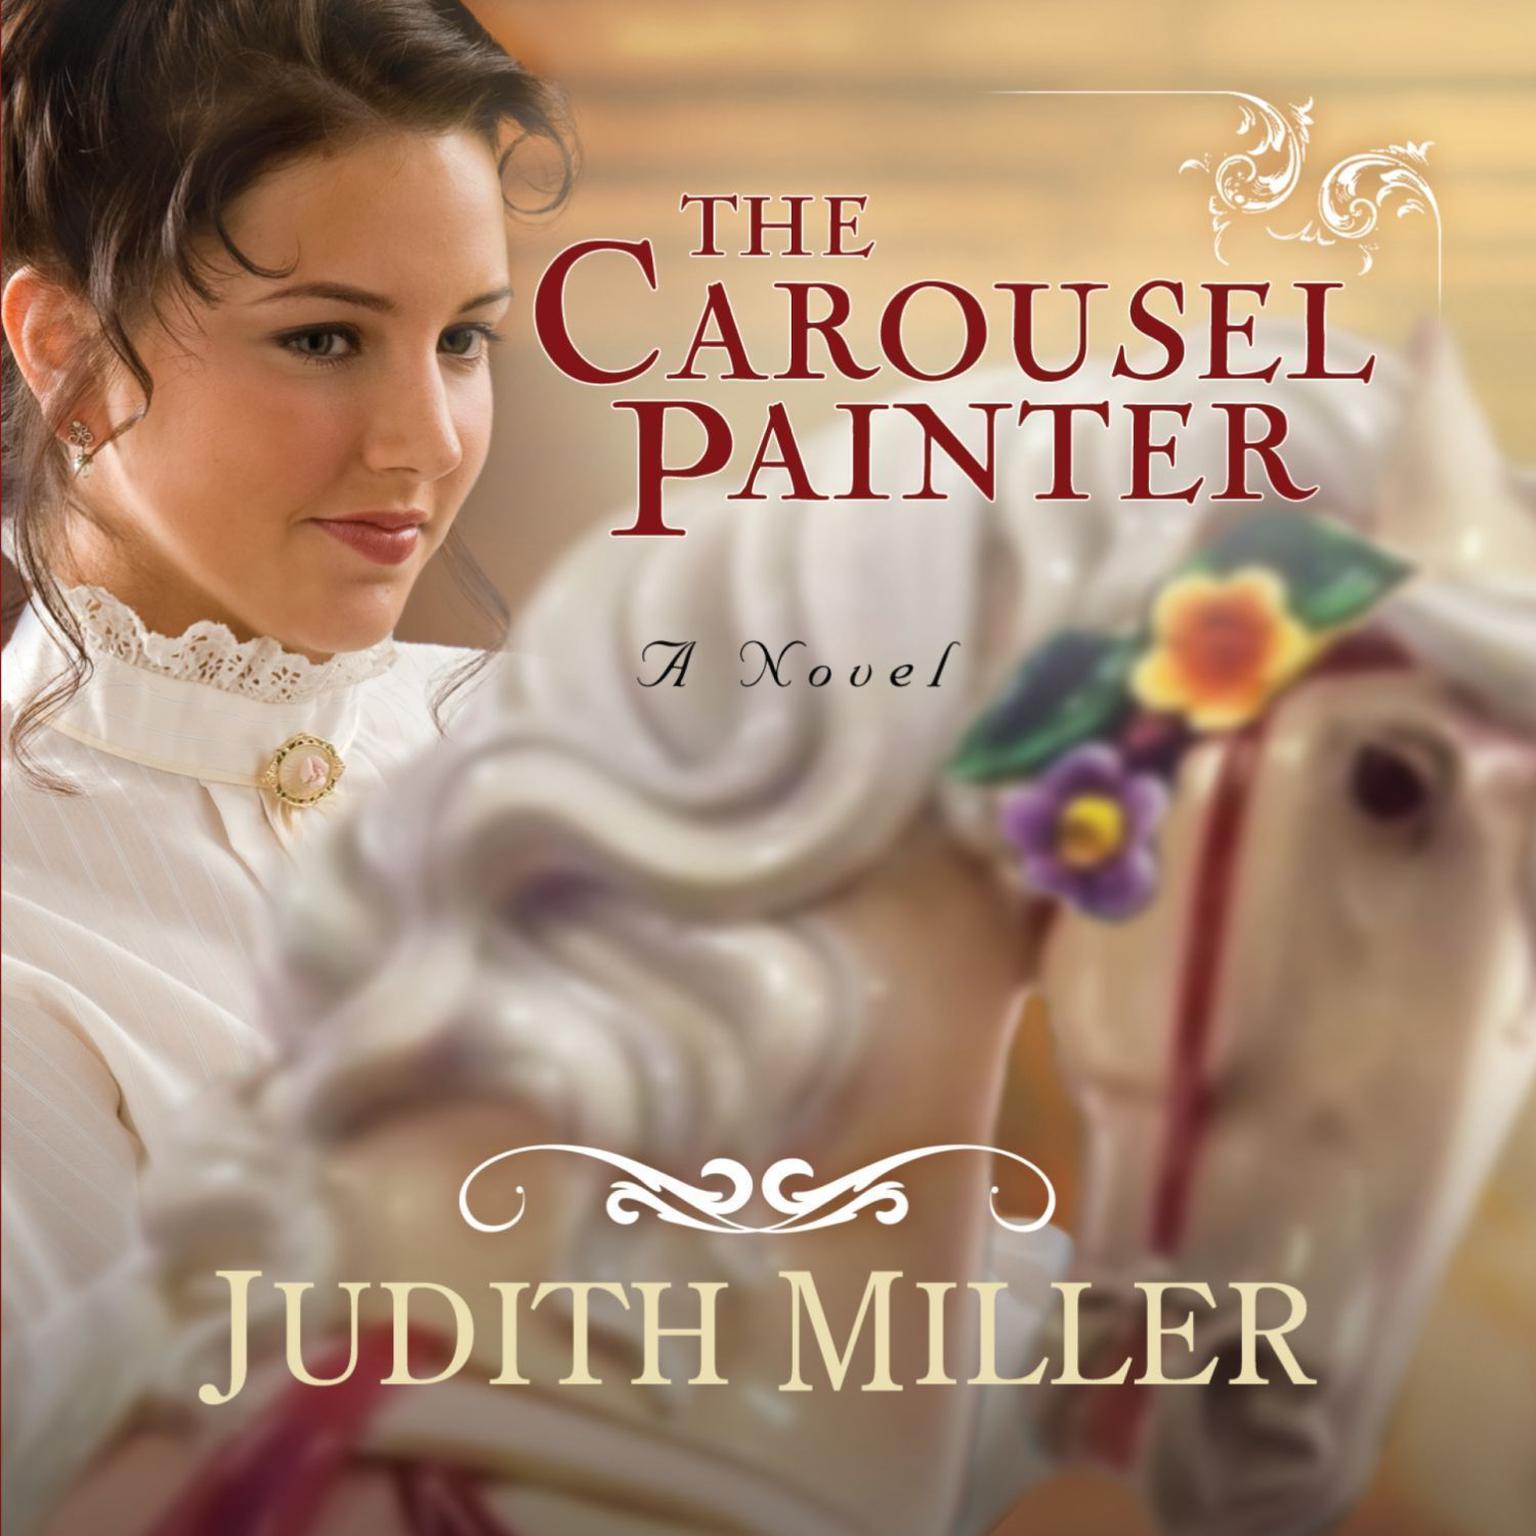 The Carousel Painter (Abridged) Audiobook, by Judith Miller